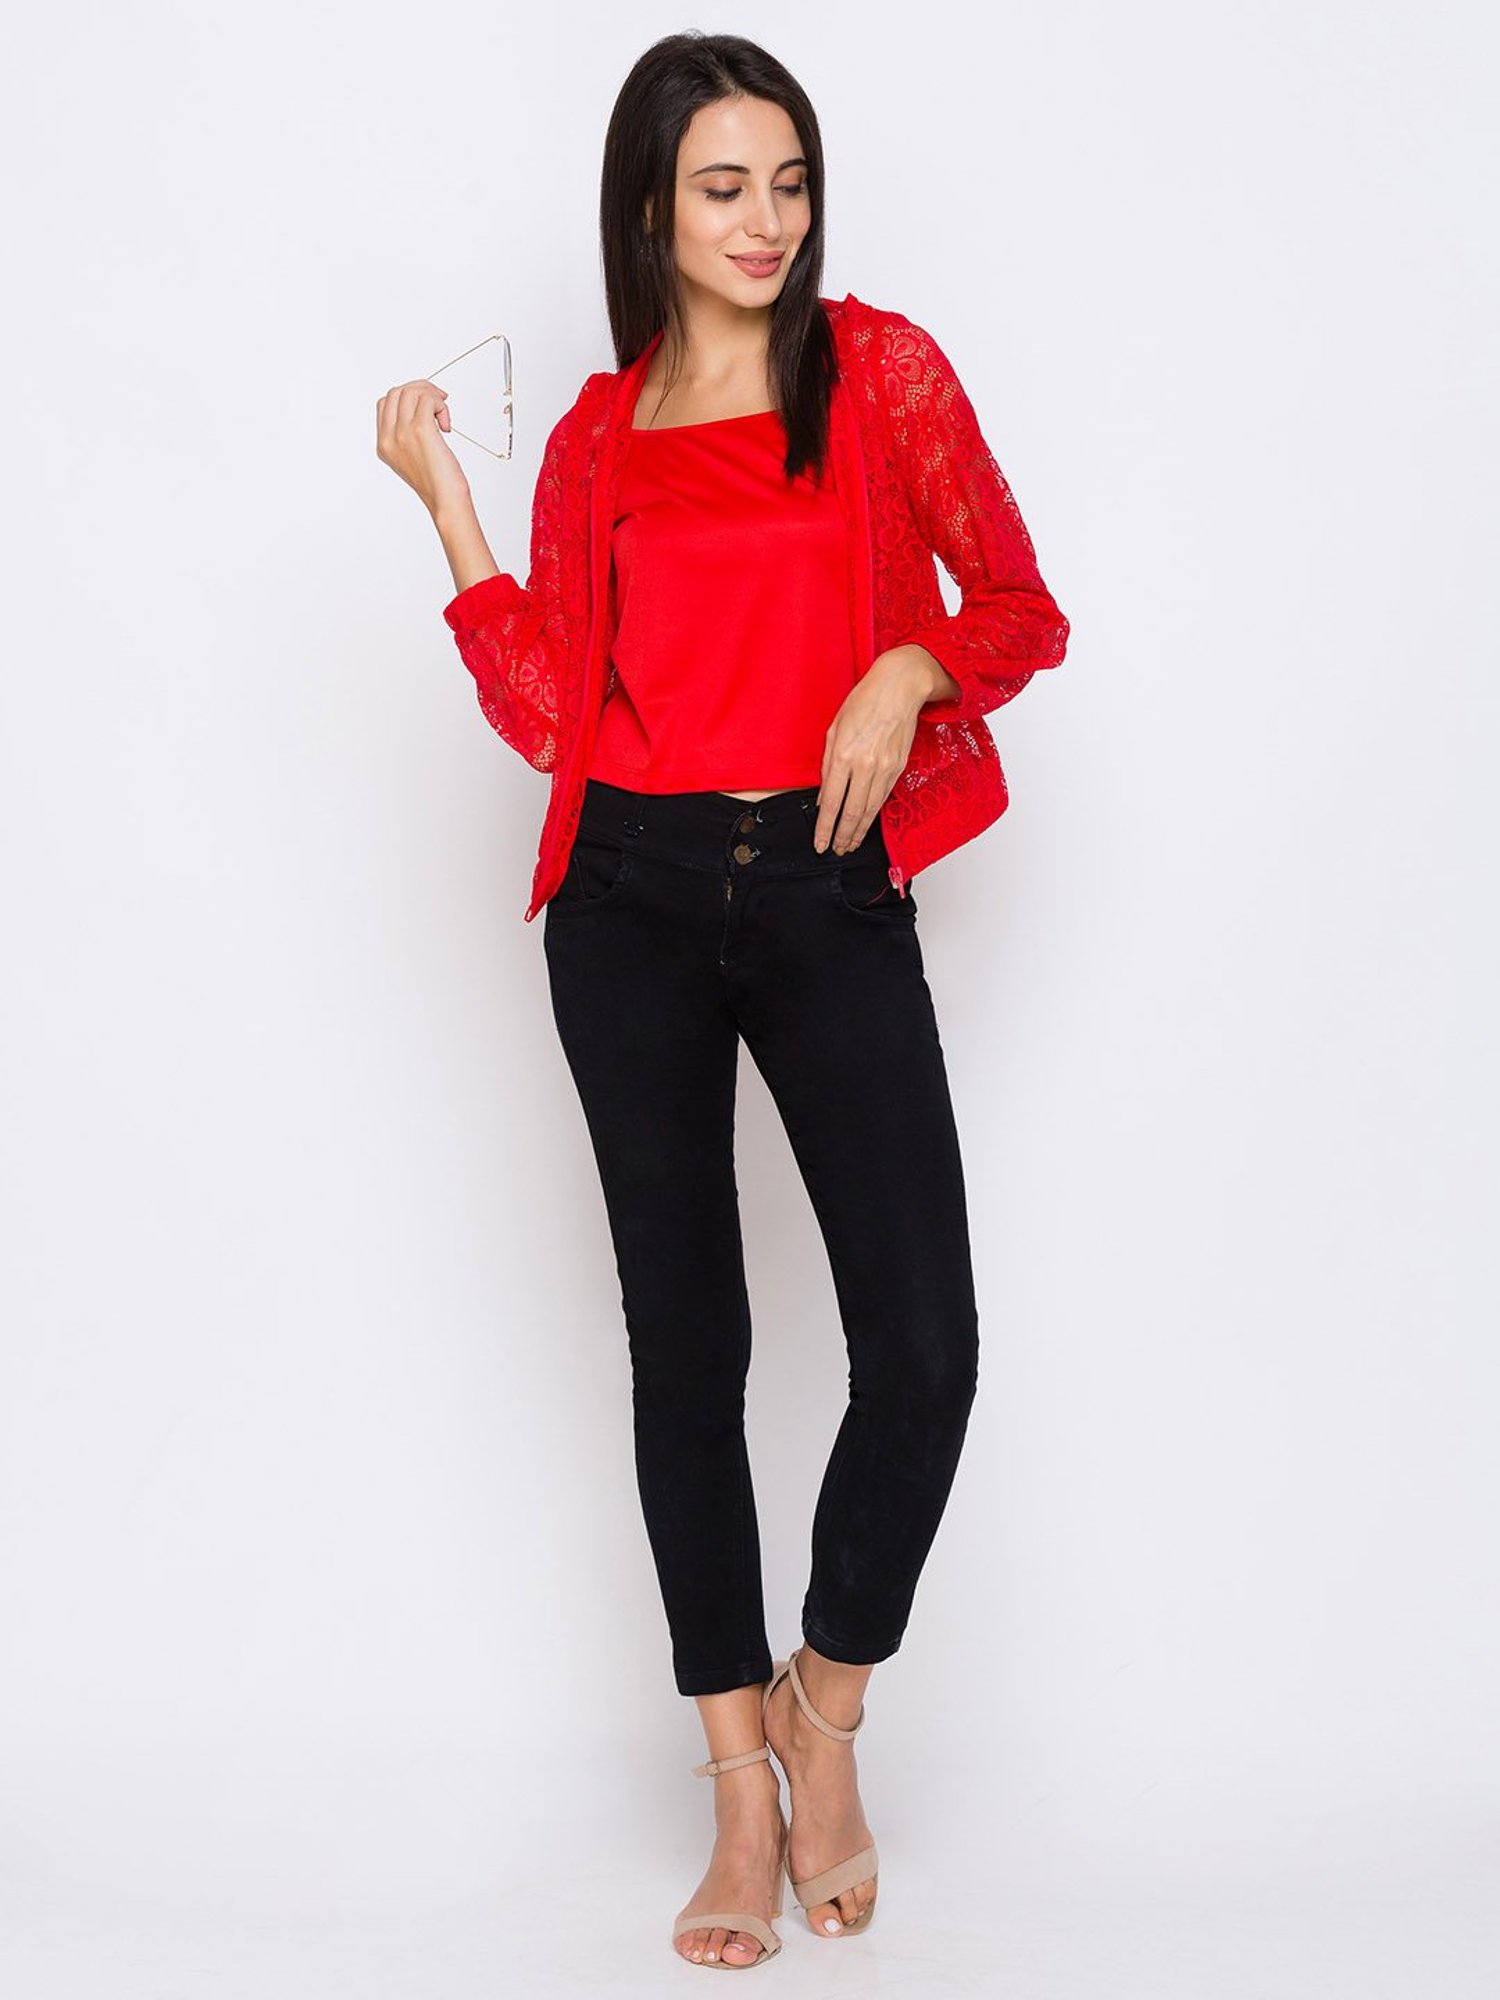 Buy Globus Red Lace Jacket for Women Online @ Tata CLiQ